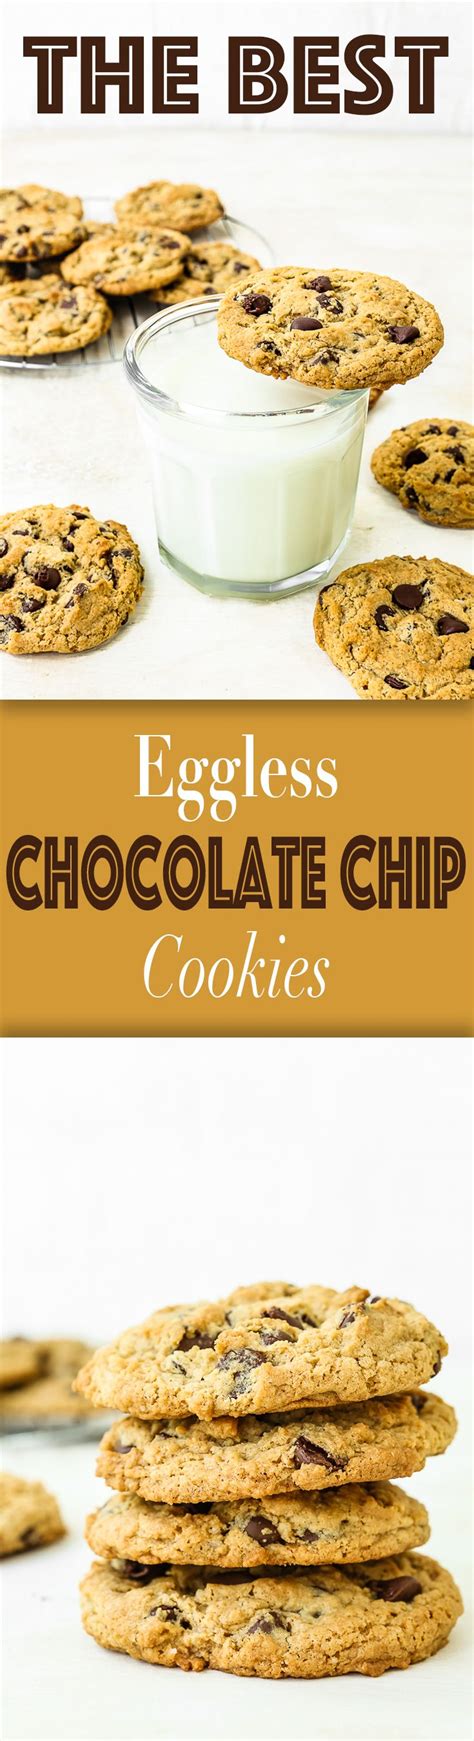 Stir in the chocolate chips. Eggless Chocolate Chips Cookies | Recipe | Chocolate chip ...